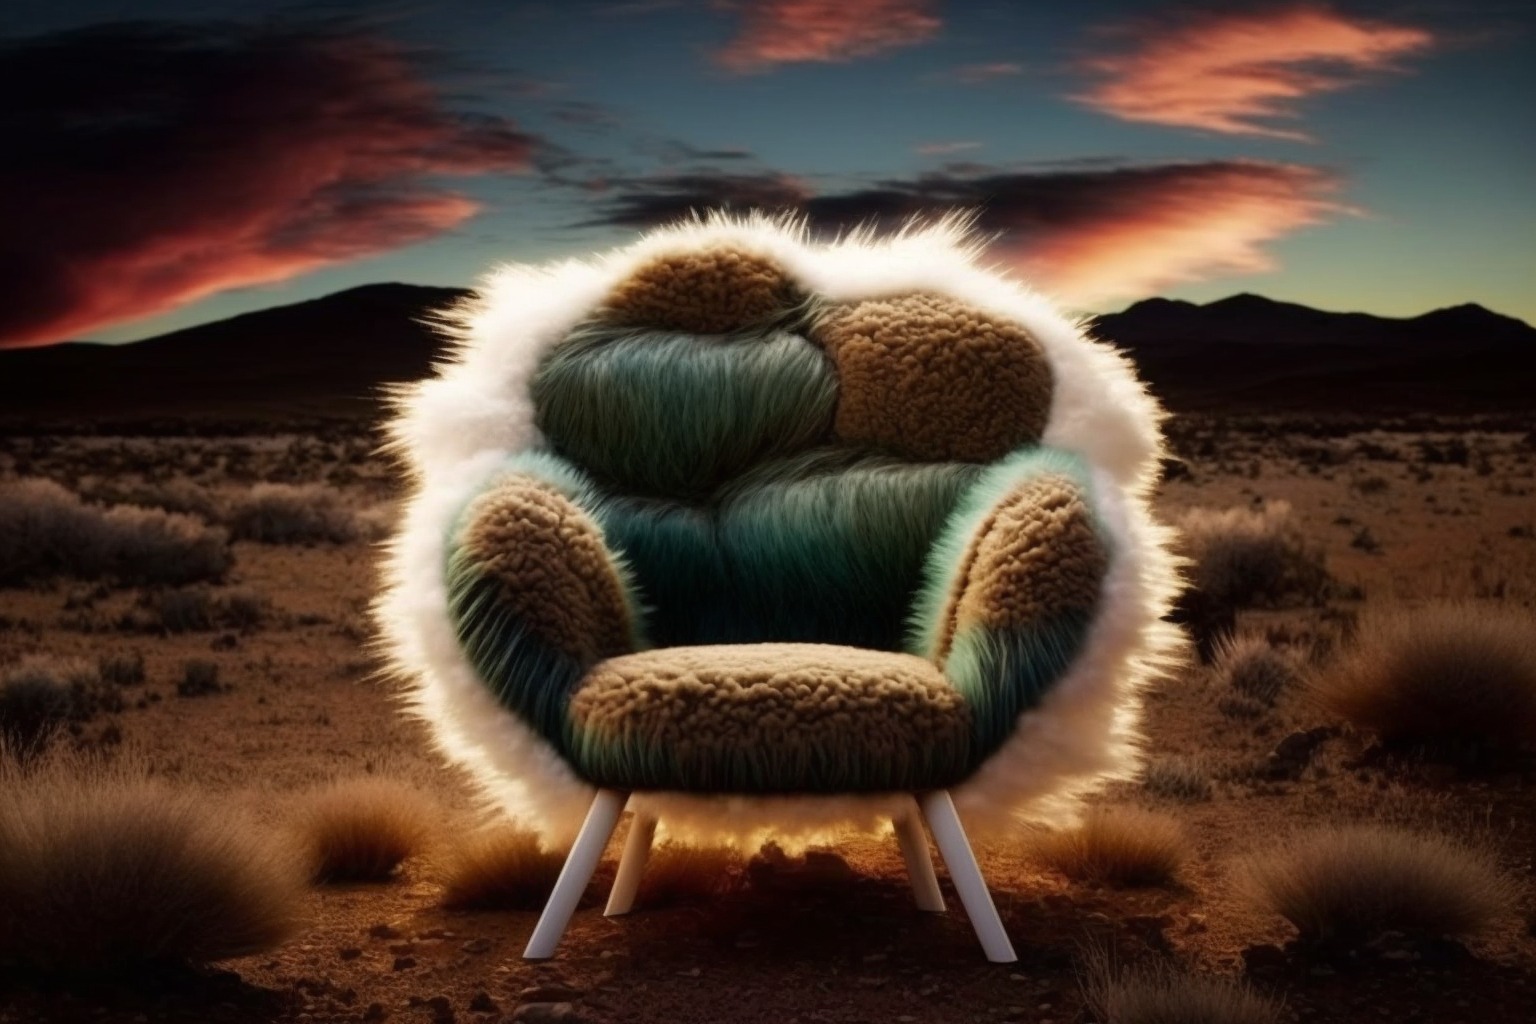 nixie13_a_hirsute_style_lounge_chair__based_off_unique_abstract_d77af50b-b129-4673-9a4f-9a7a14cbc9dc